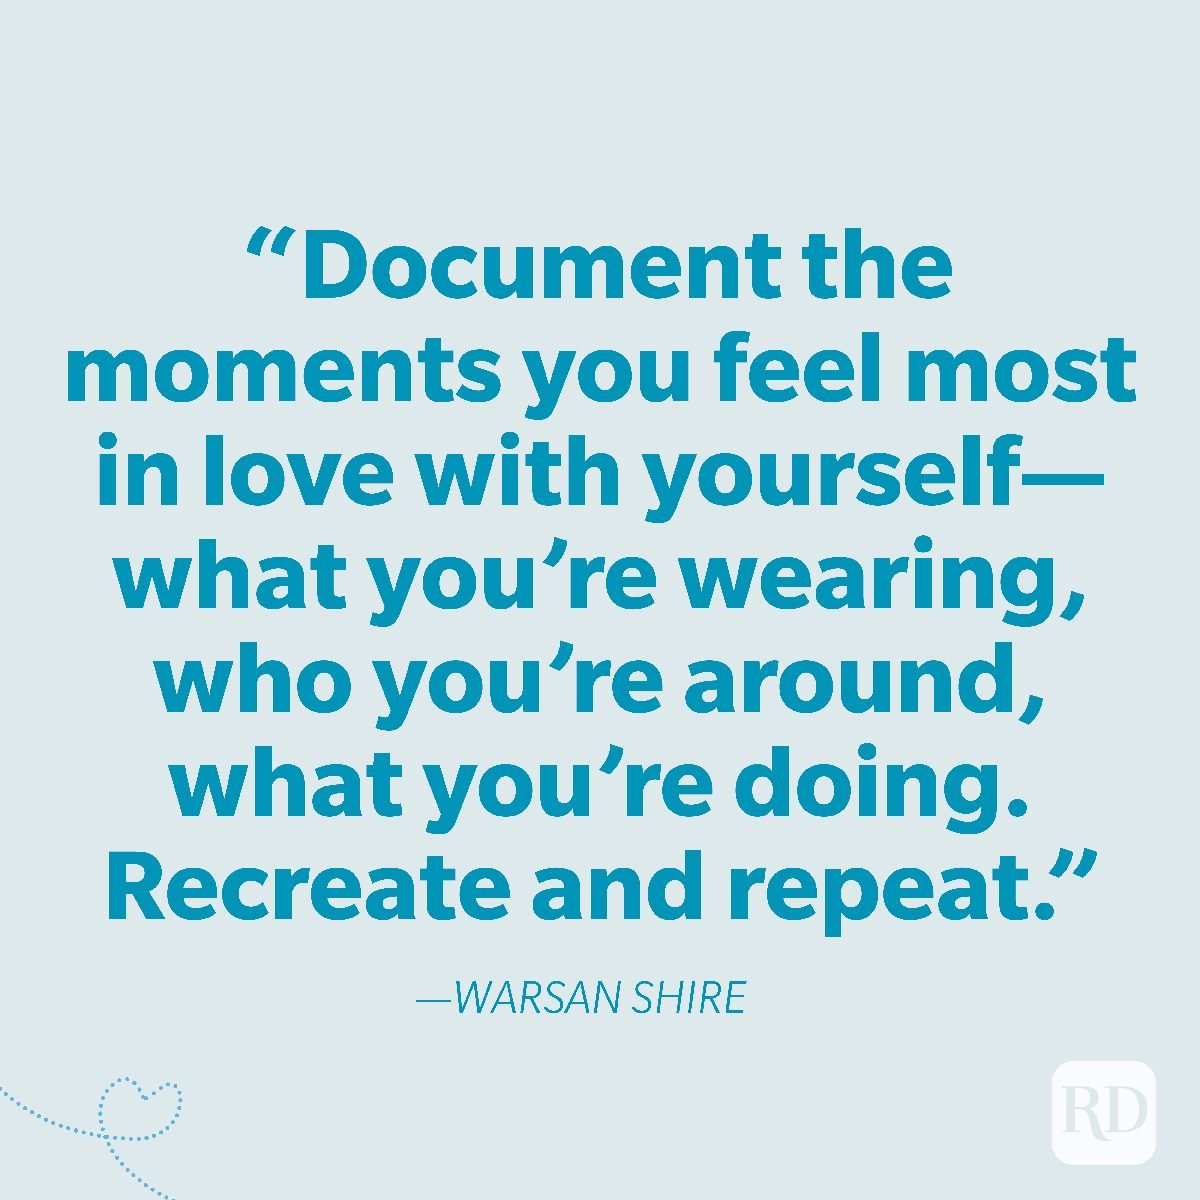 9-Document the moments you feel most in love with yourself—what you're wearing, who you're around, what you're doing. Recreate and repeat